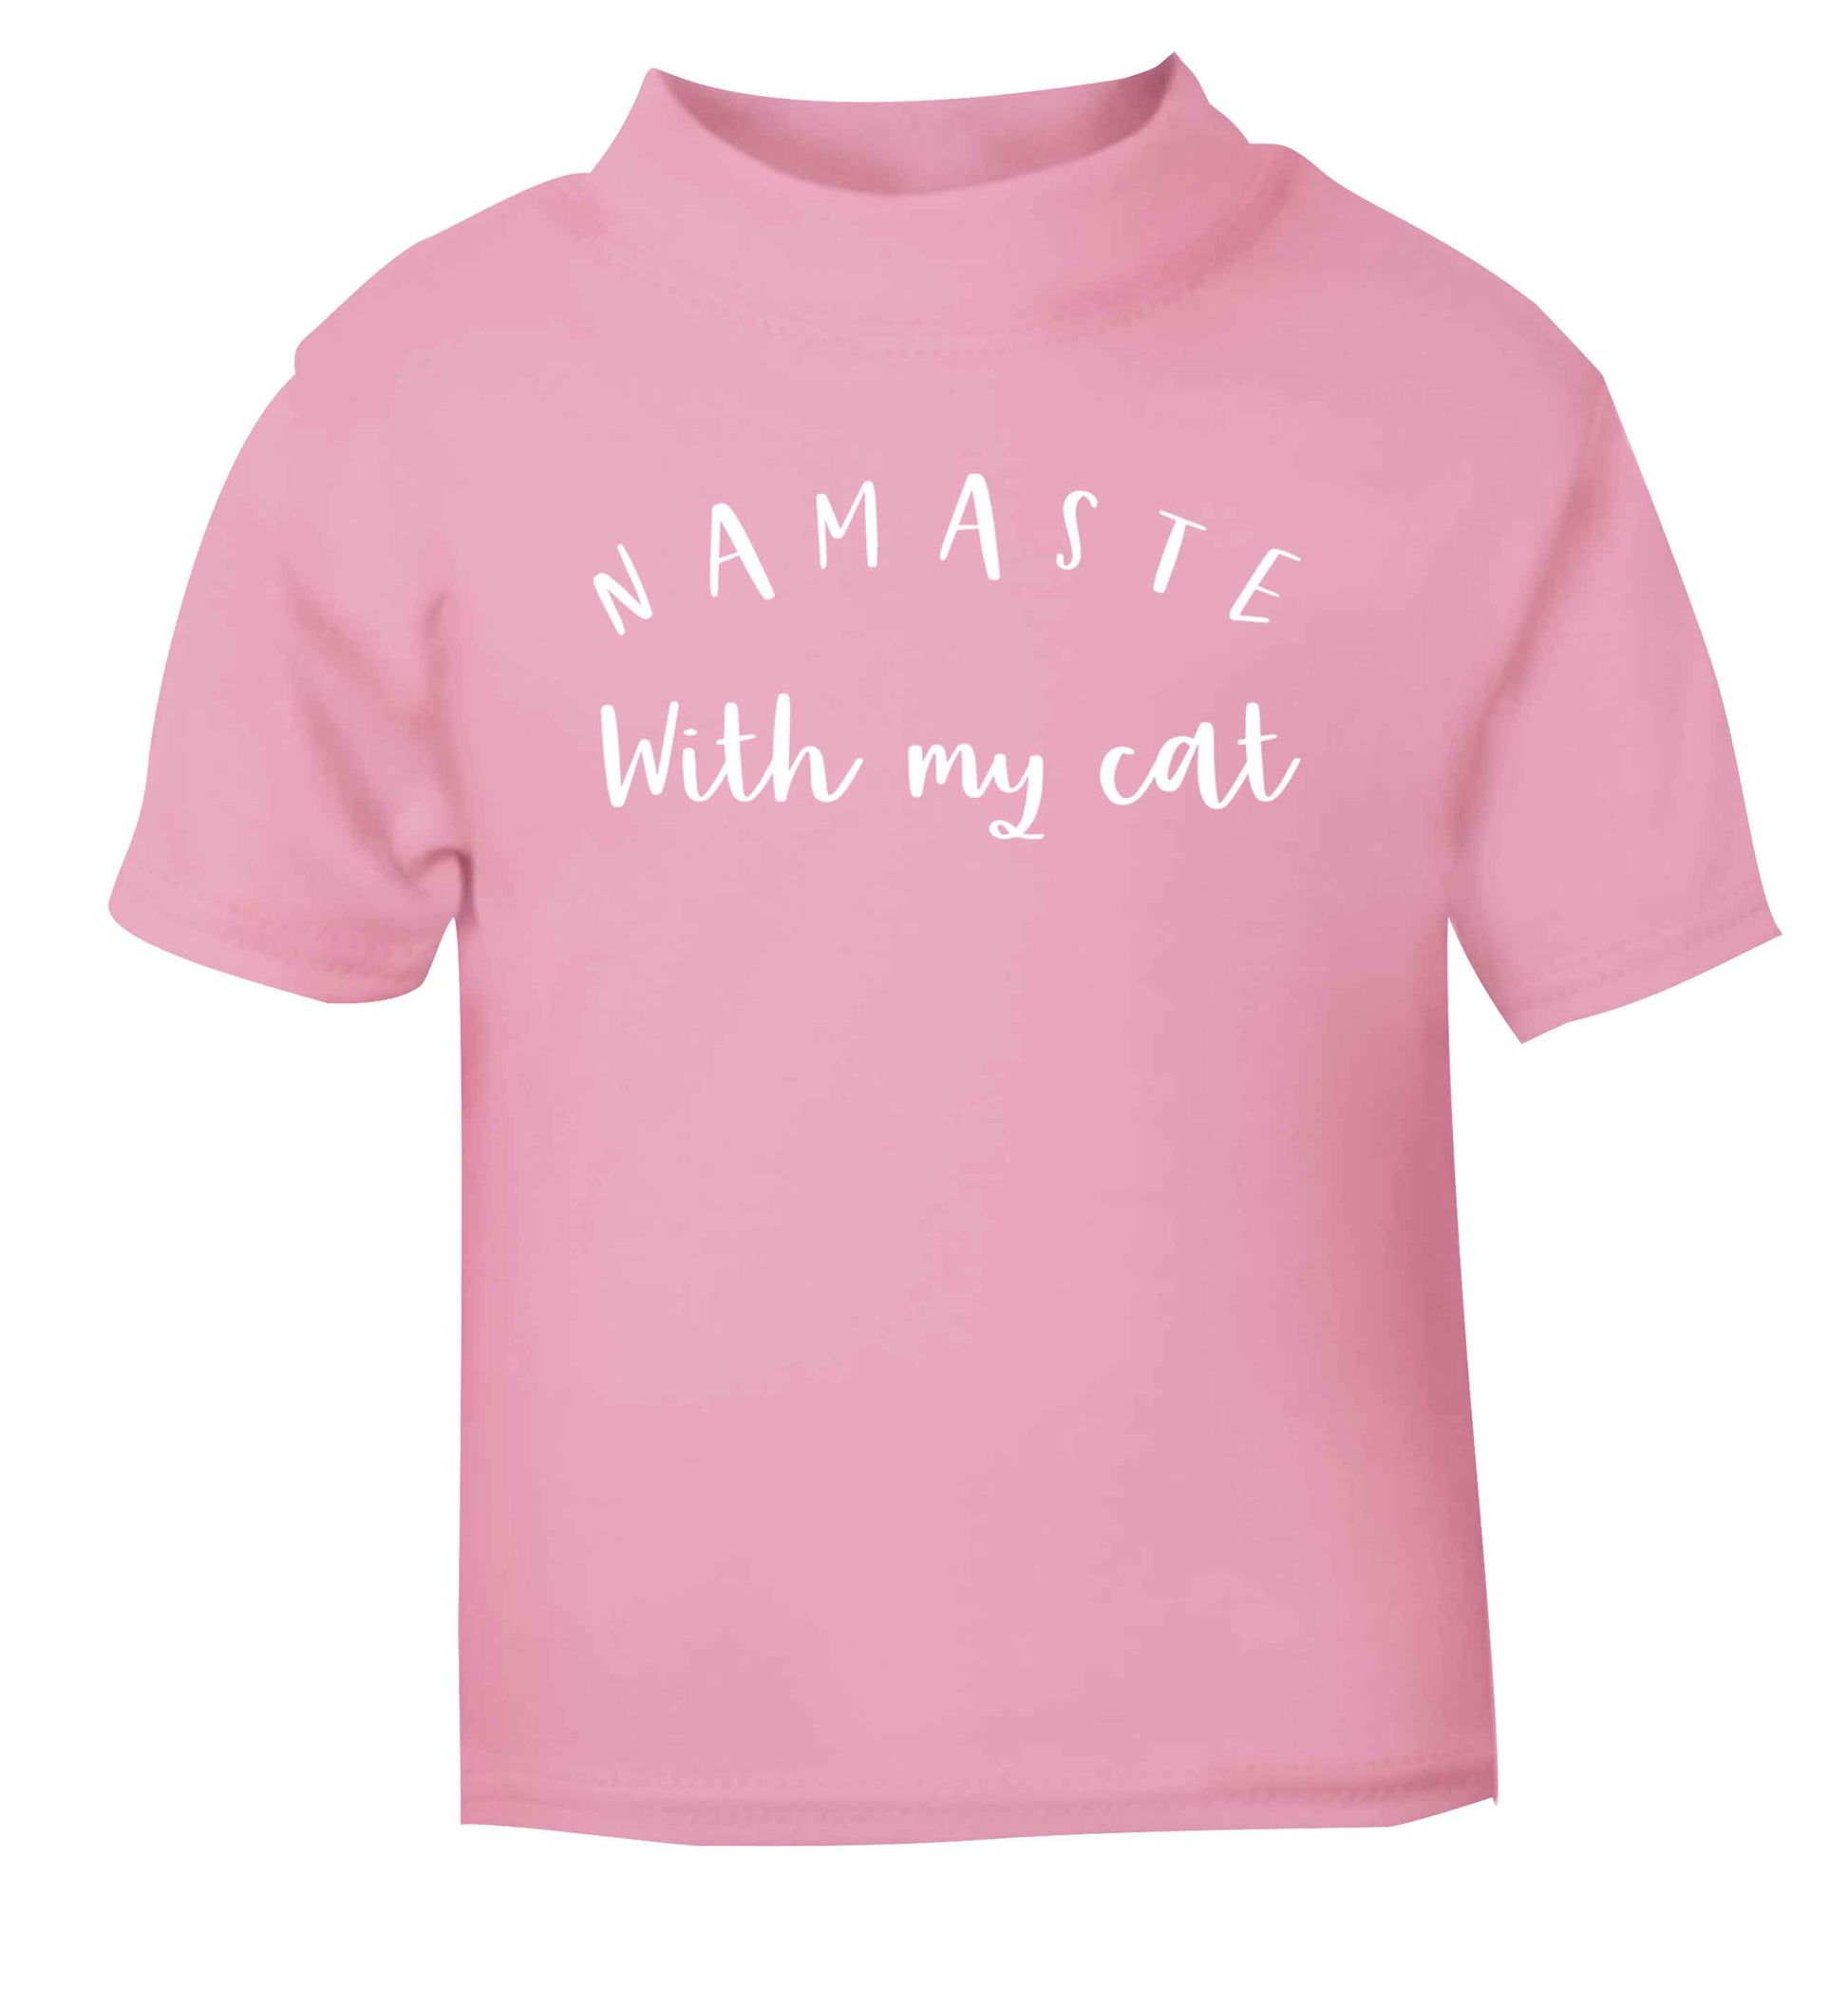 Namaste with my cat light pink Baby Toddler Tshirt 2 Years